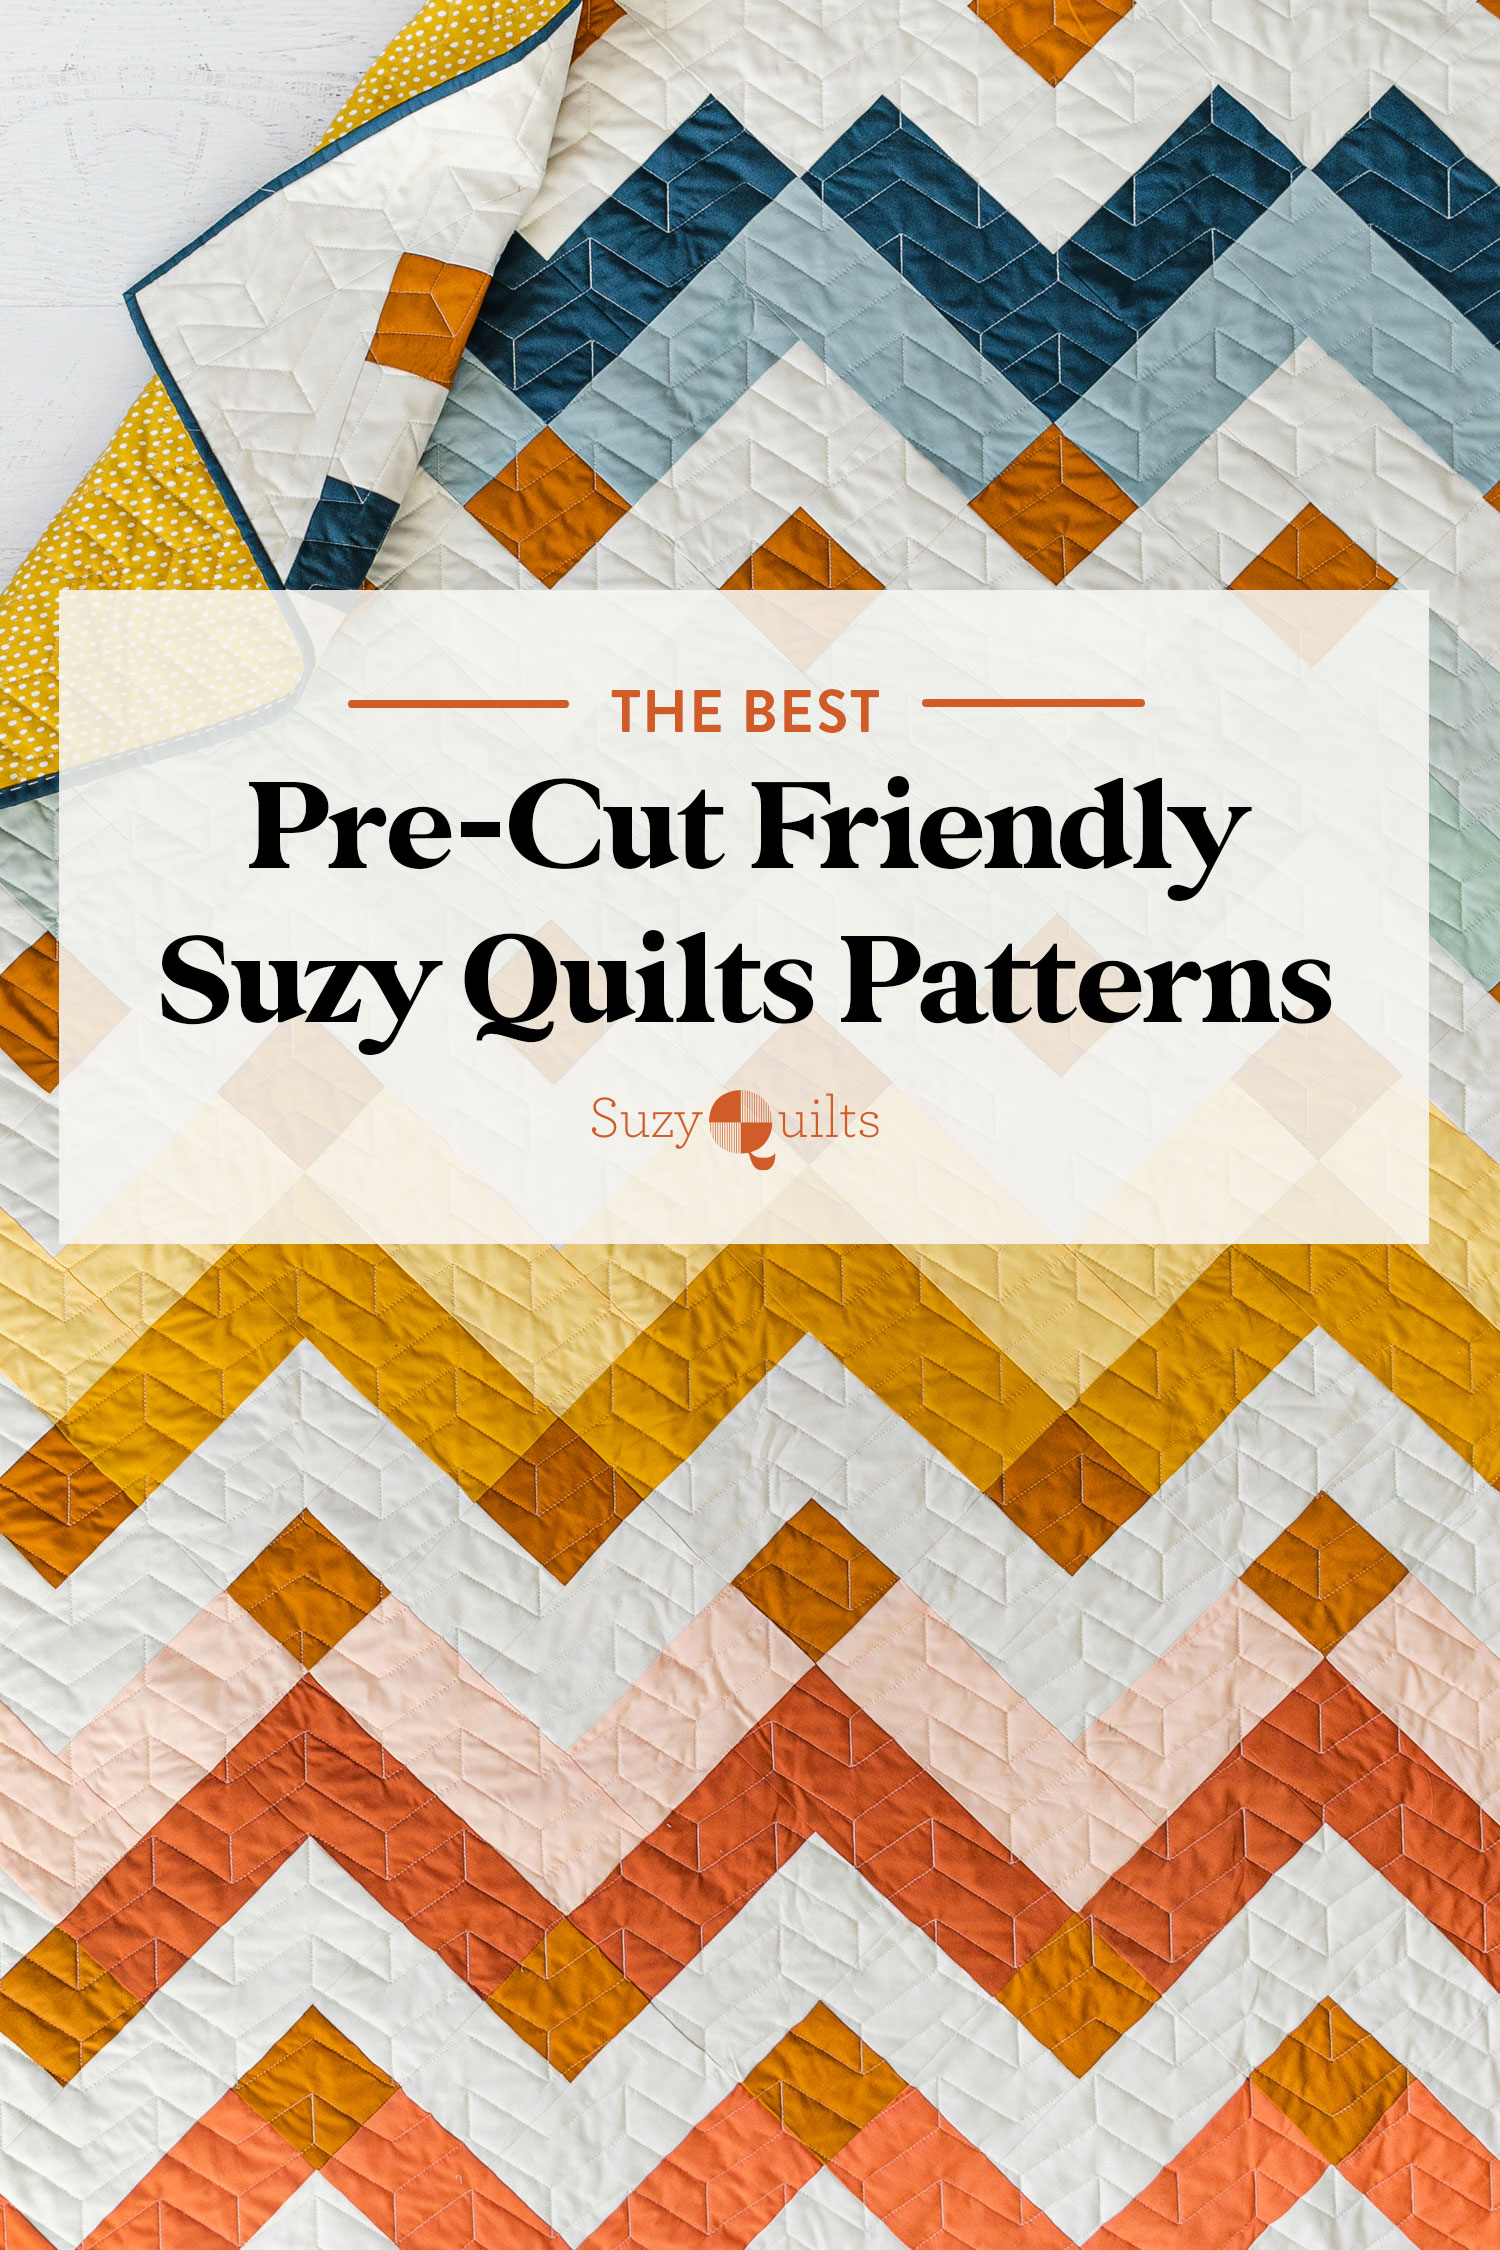 Find the perfect pre-cut friendly Suzy Quilts pattern with this handy guide! suzyquilts.com #sewingdiy #quilting